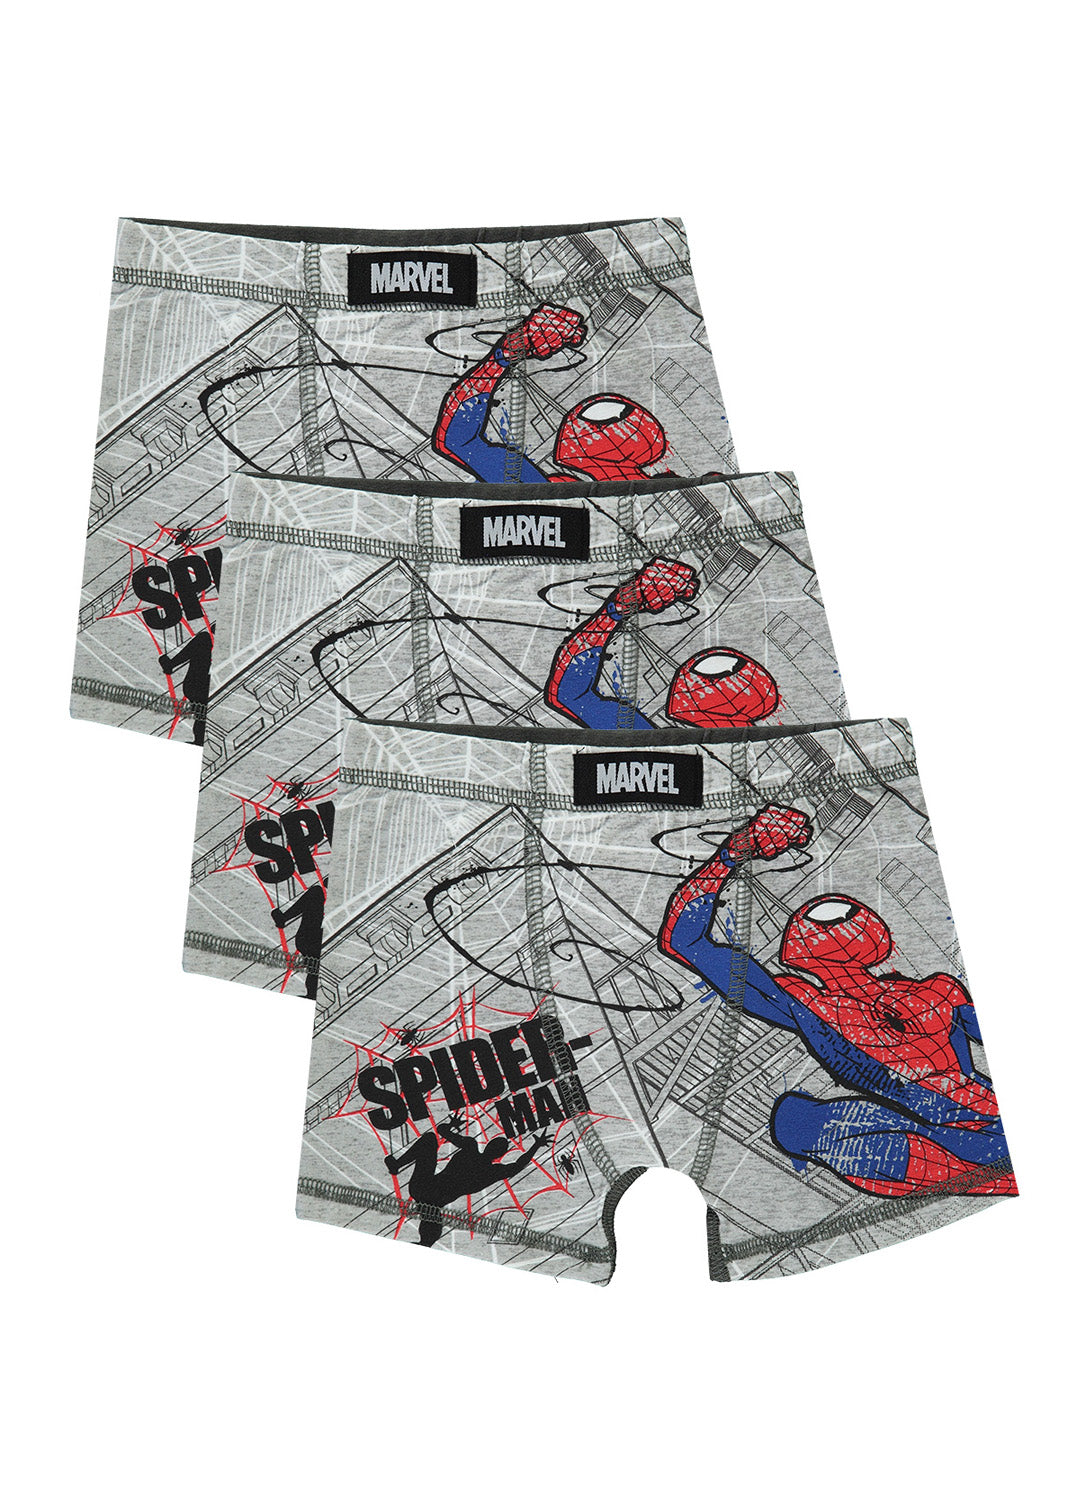 3 Boys Boxers with Spider-Man print